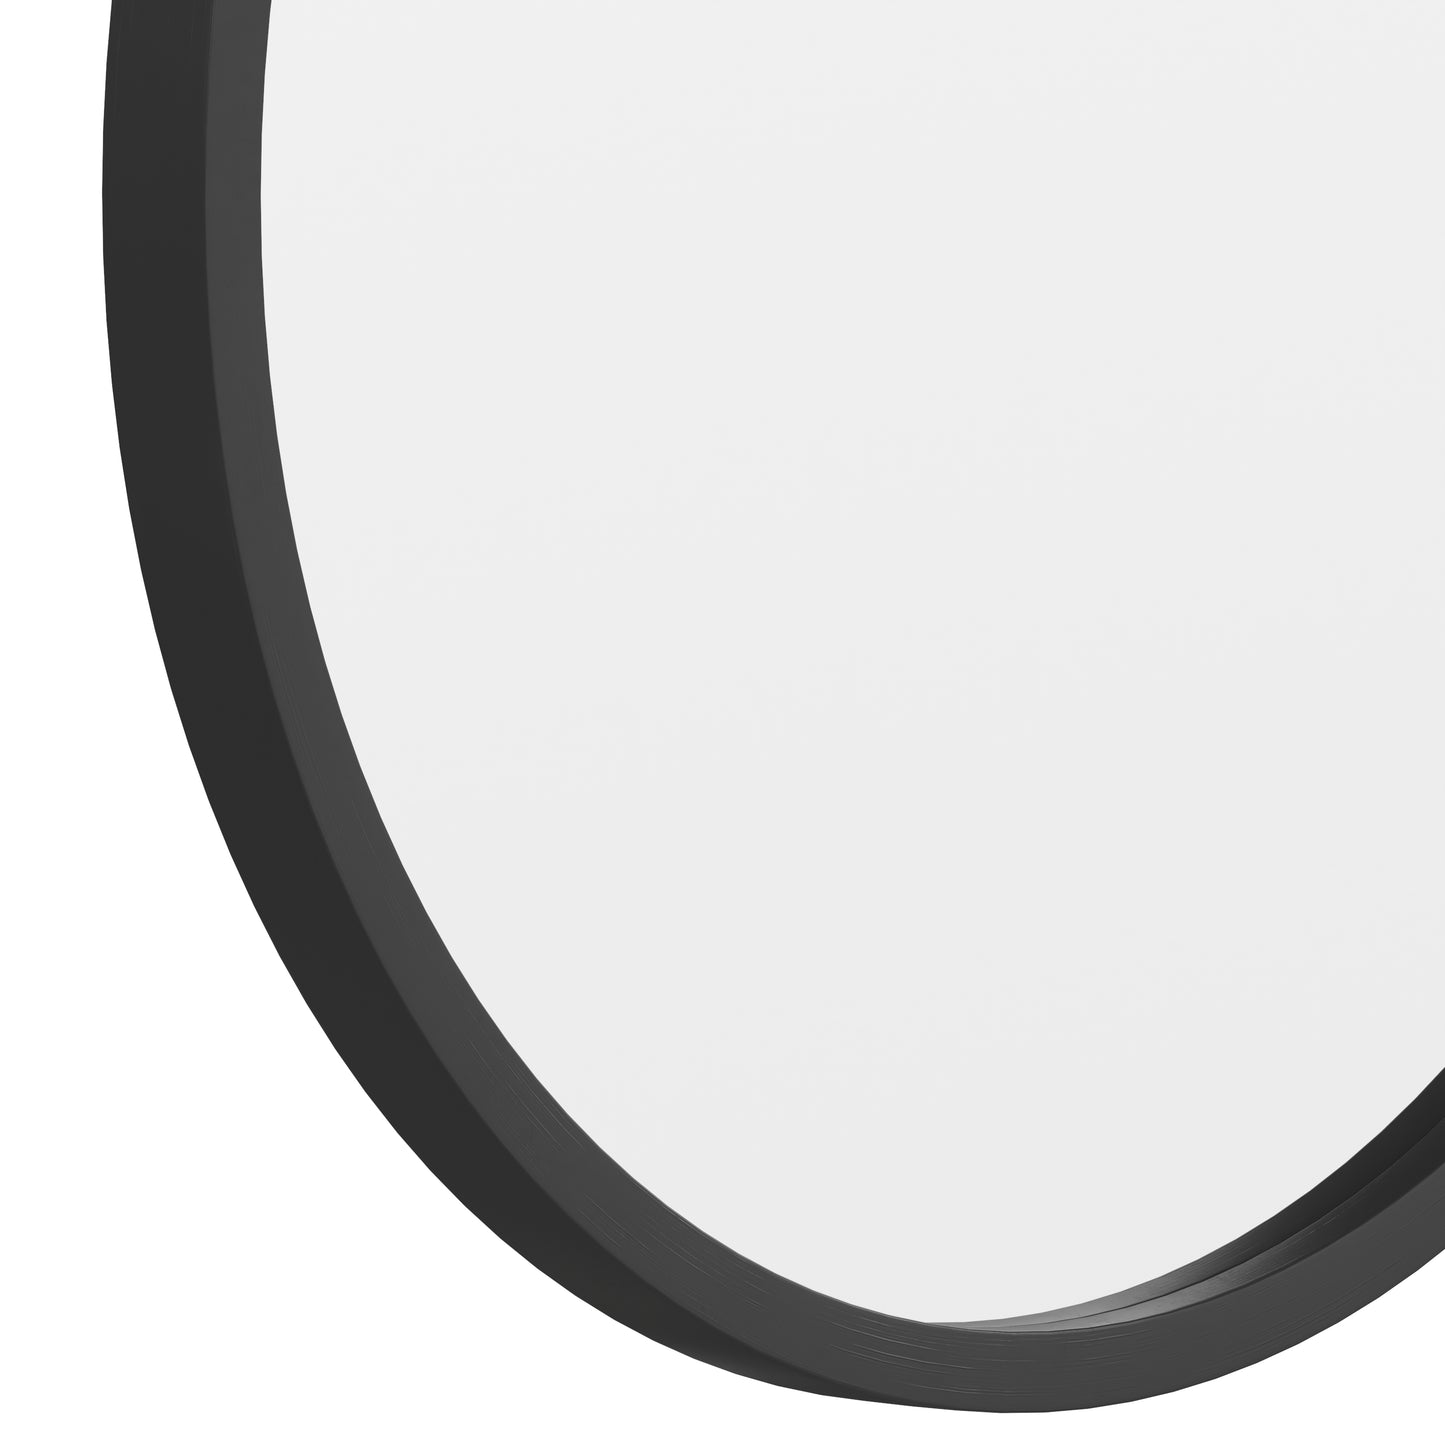 Black 16" Round Wall Mirror HFKHD-6GD-CRE8-881315-GG